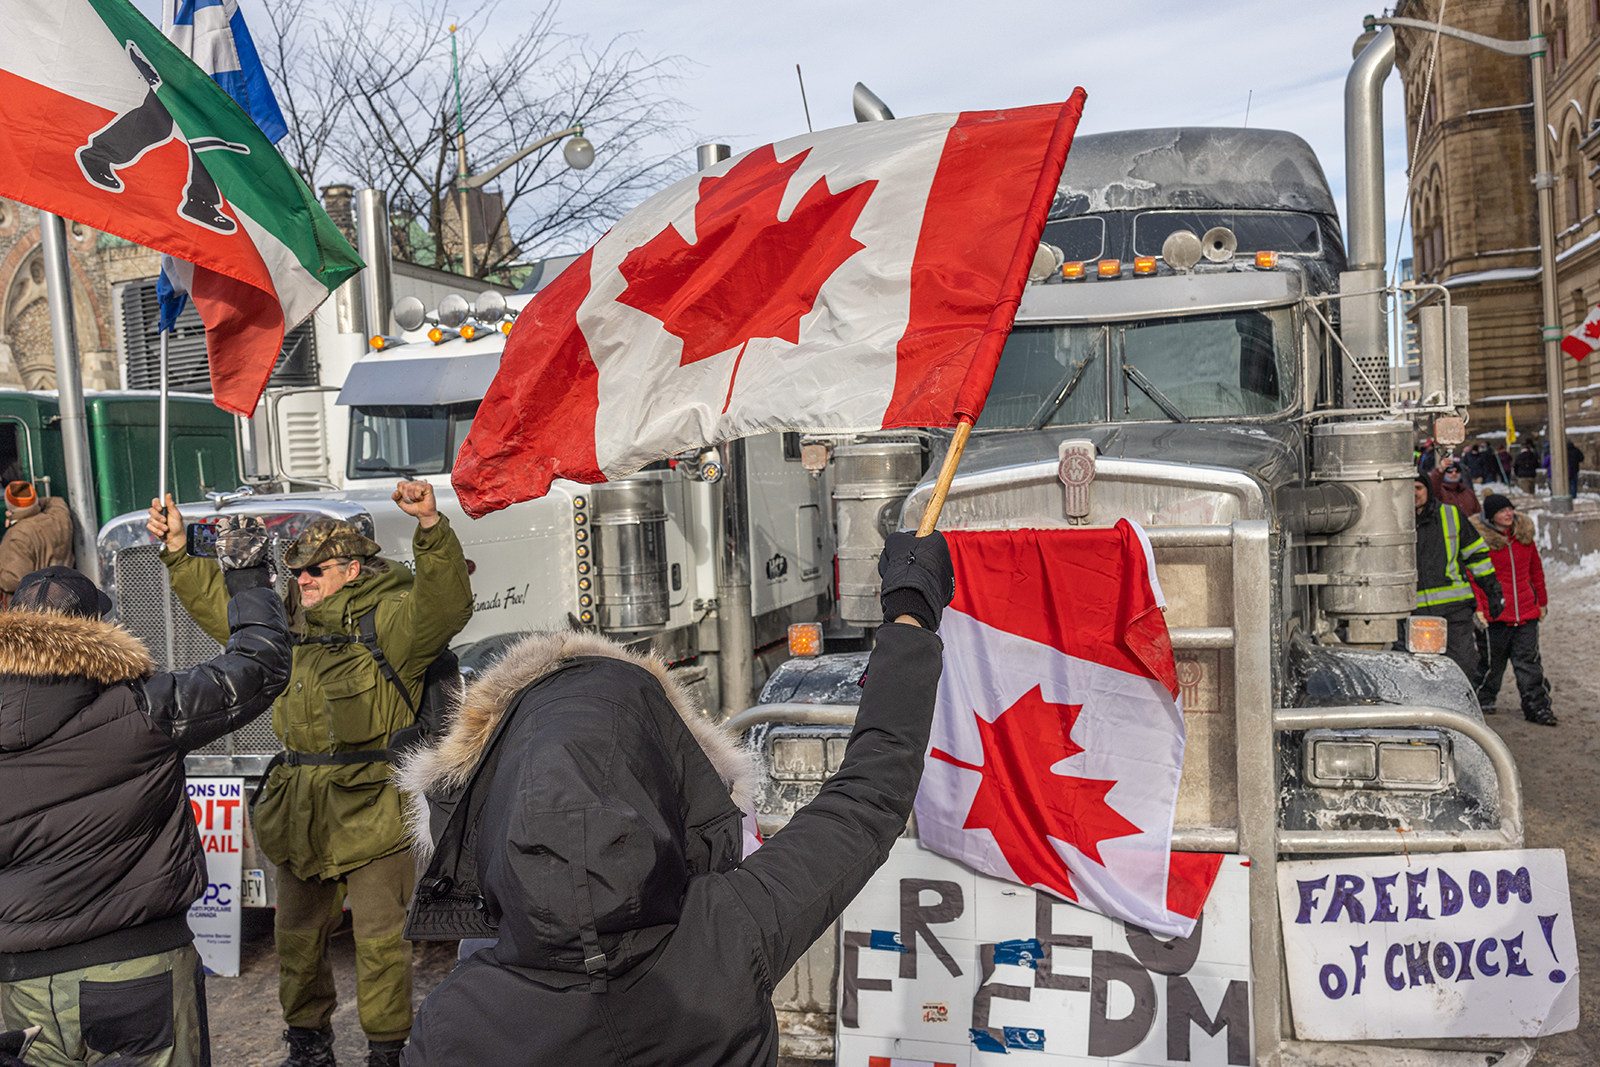 A woman waves a flag and cheers on truckers in protest of Covid-19 vaccine mandates in Ottawa, Canada, in January 2022. Photo: TNS